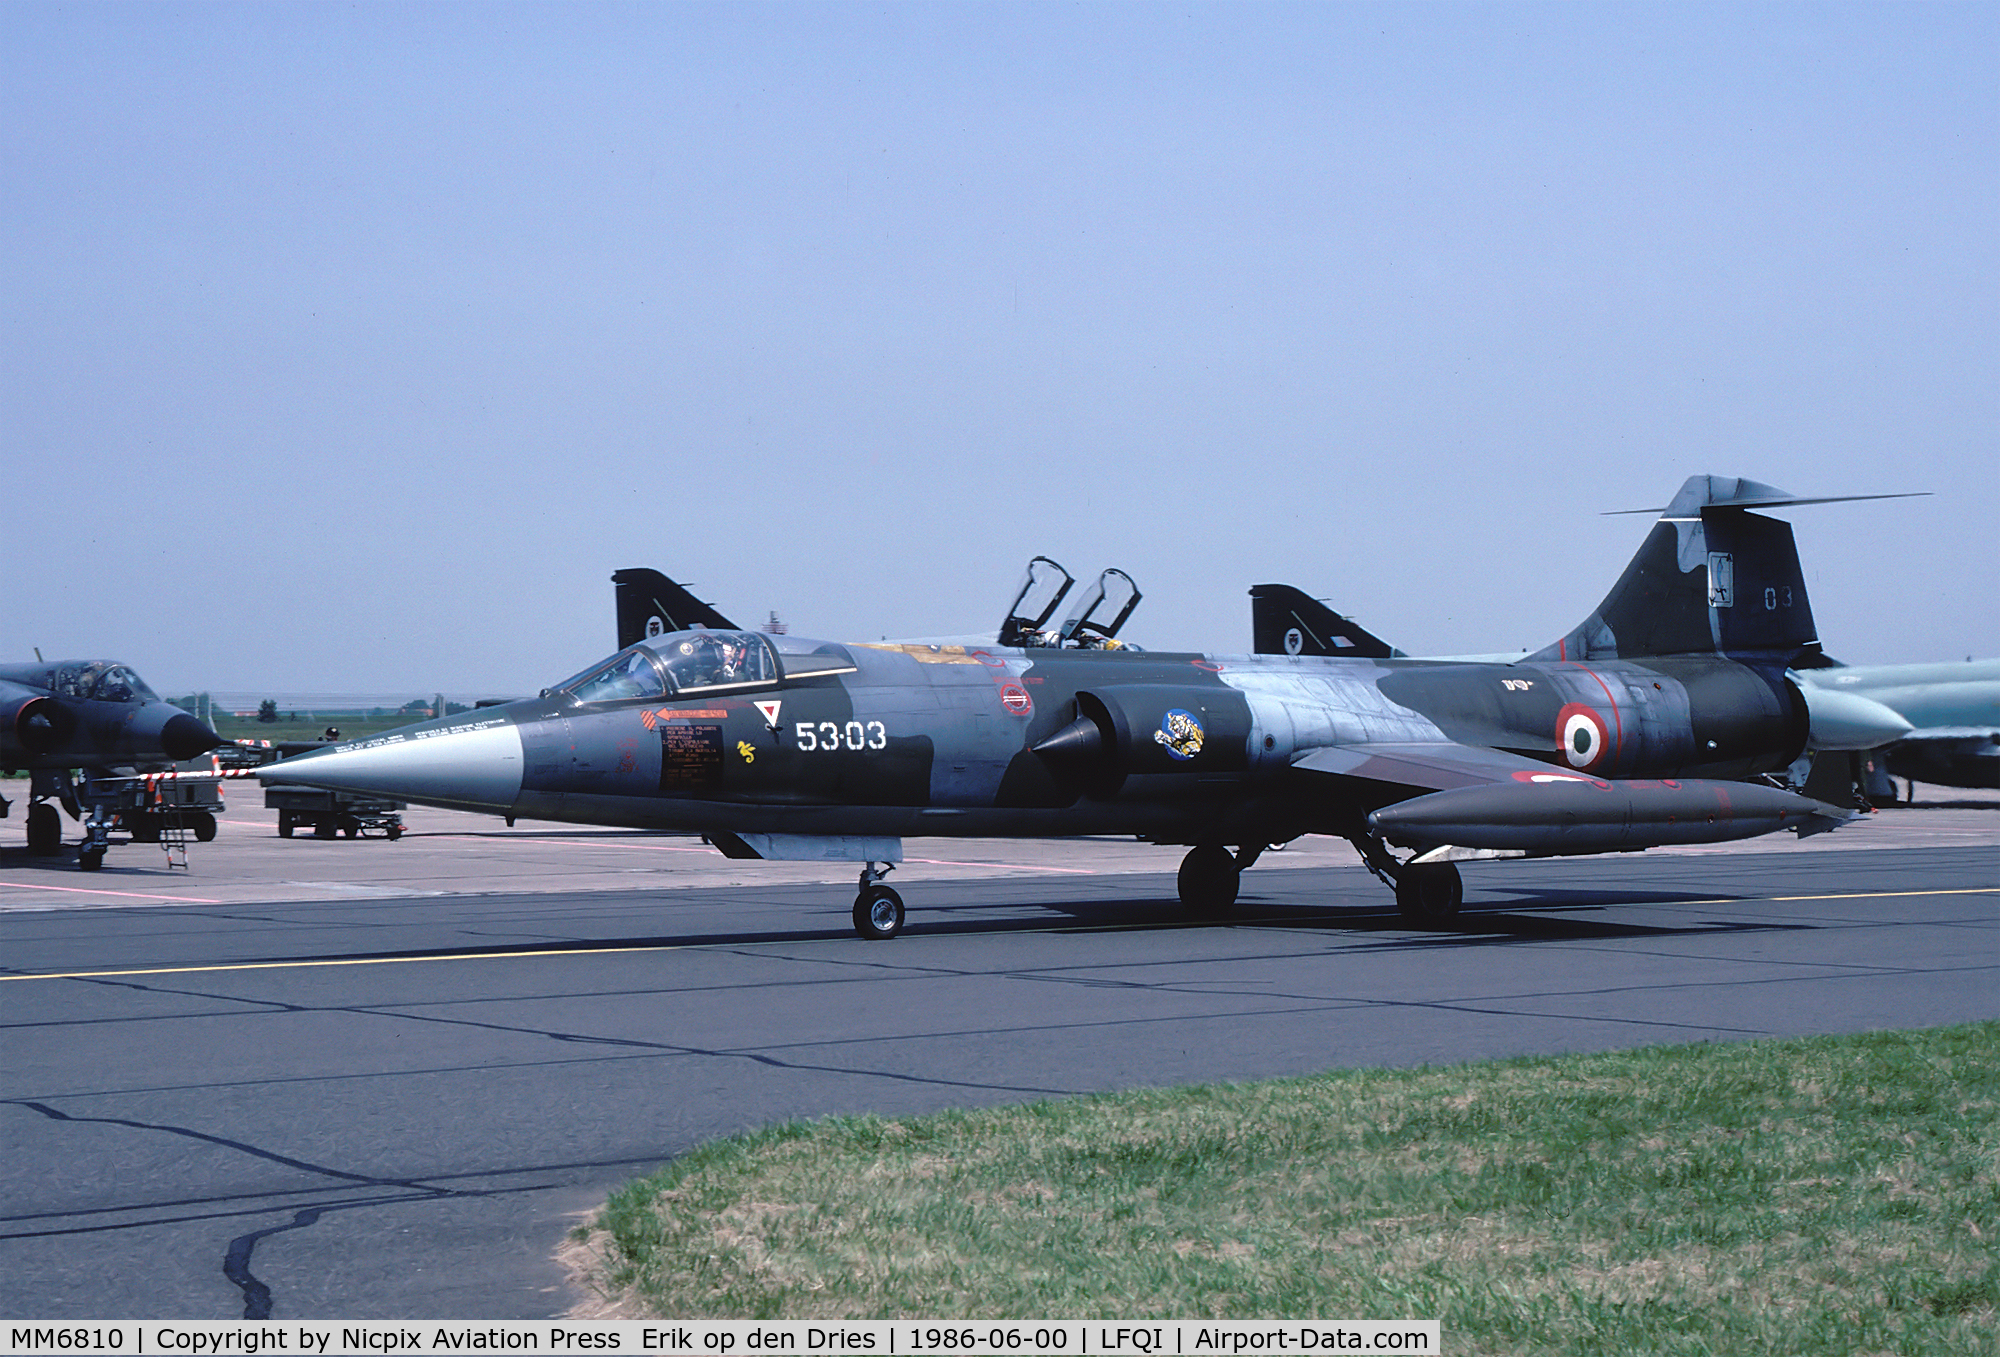 MM6810, Aeritalia F-104S-ASA Starfighter C/N 1110, Italy AF 21 sqn participated in the NATO Tigermeet 1986 at Cambrai AB, France. mm6810 was one of the present F-104's.